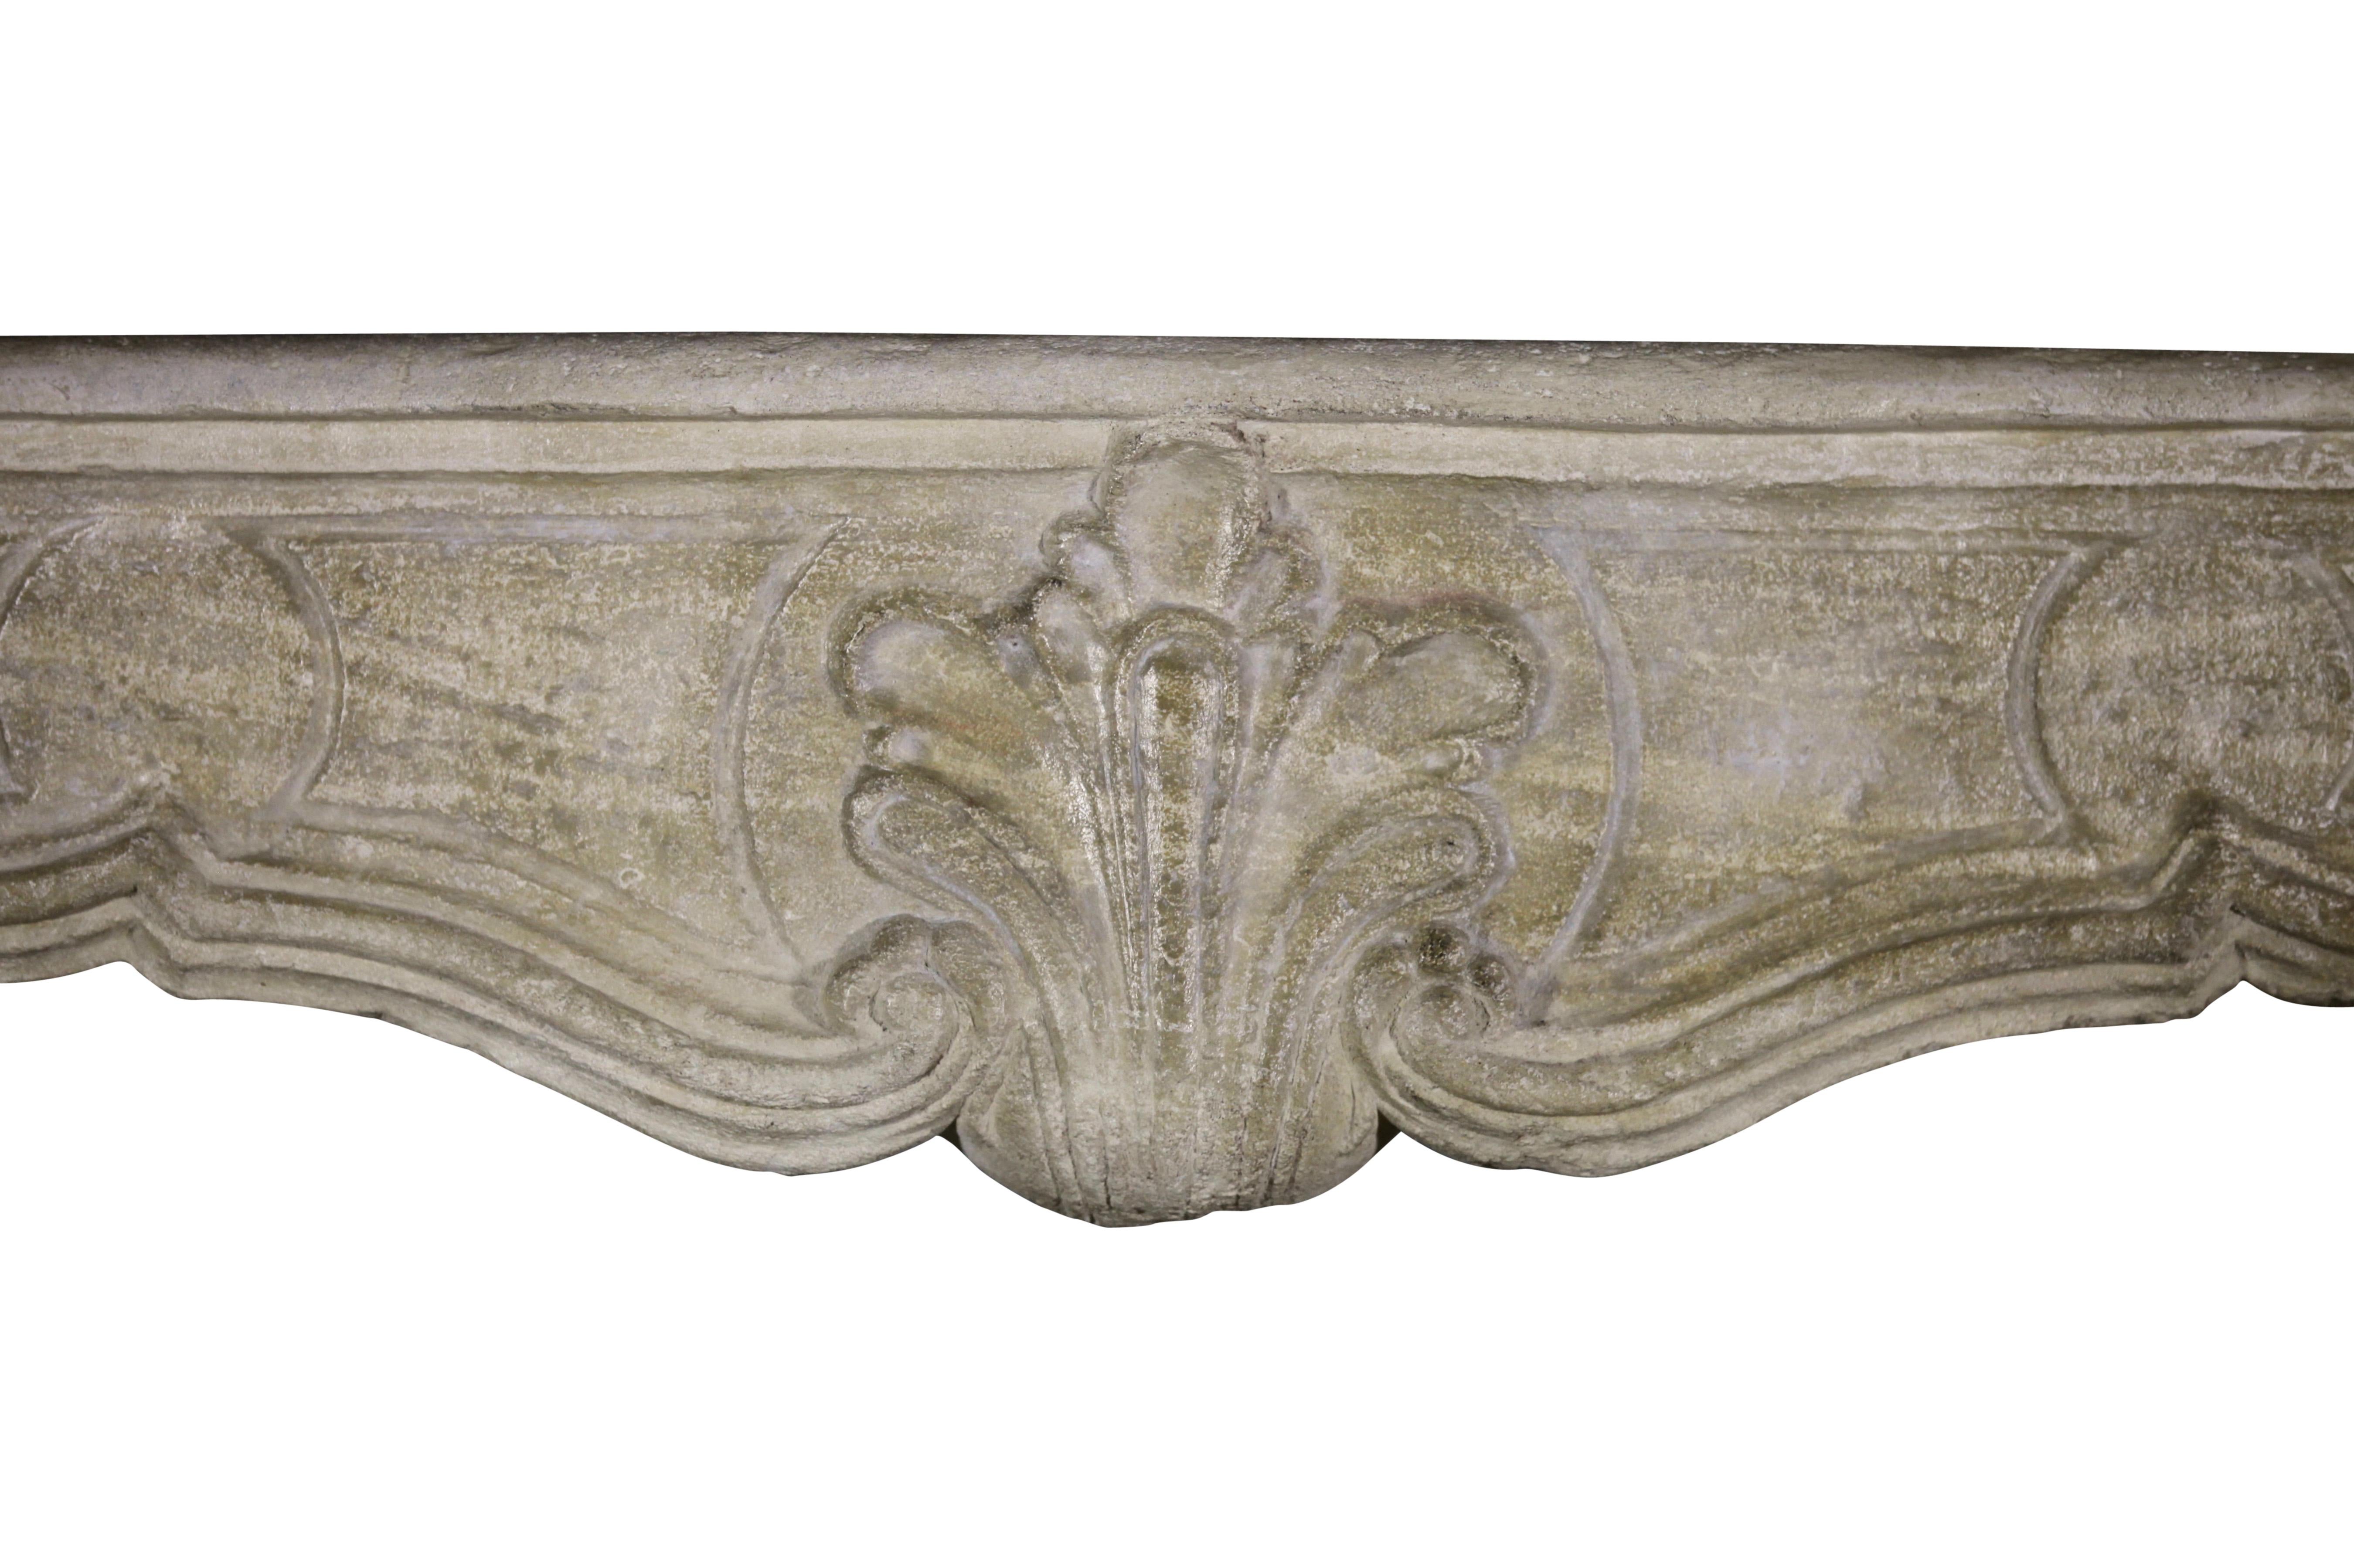 This original limestone French country Louis XIV period fireplace mantel has a great patina. Some restorations were made and barely to notice. When touching it, it has a silky feeling. A perfect mantel for a country rustic interior with a small